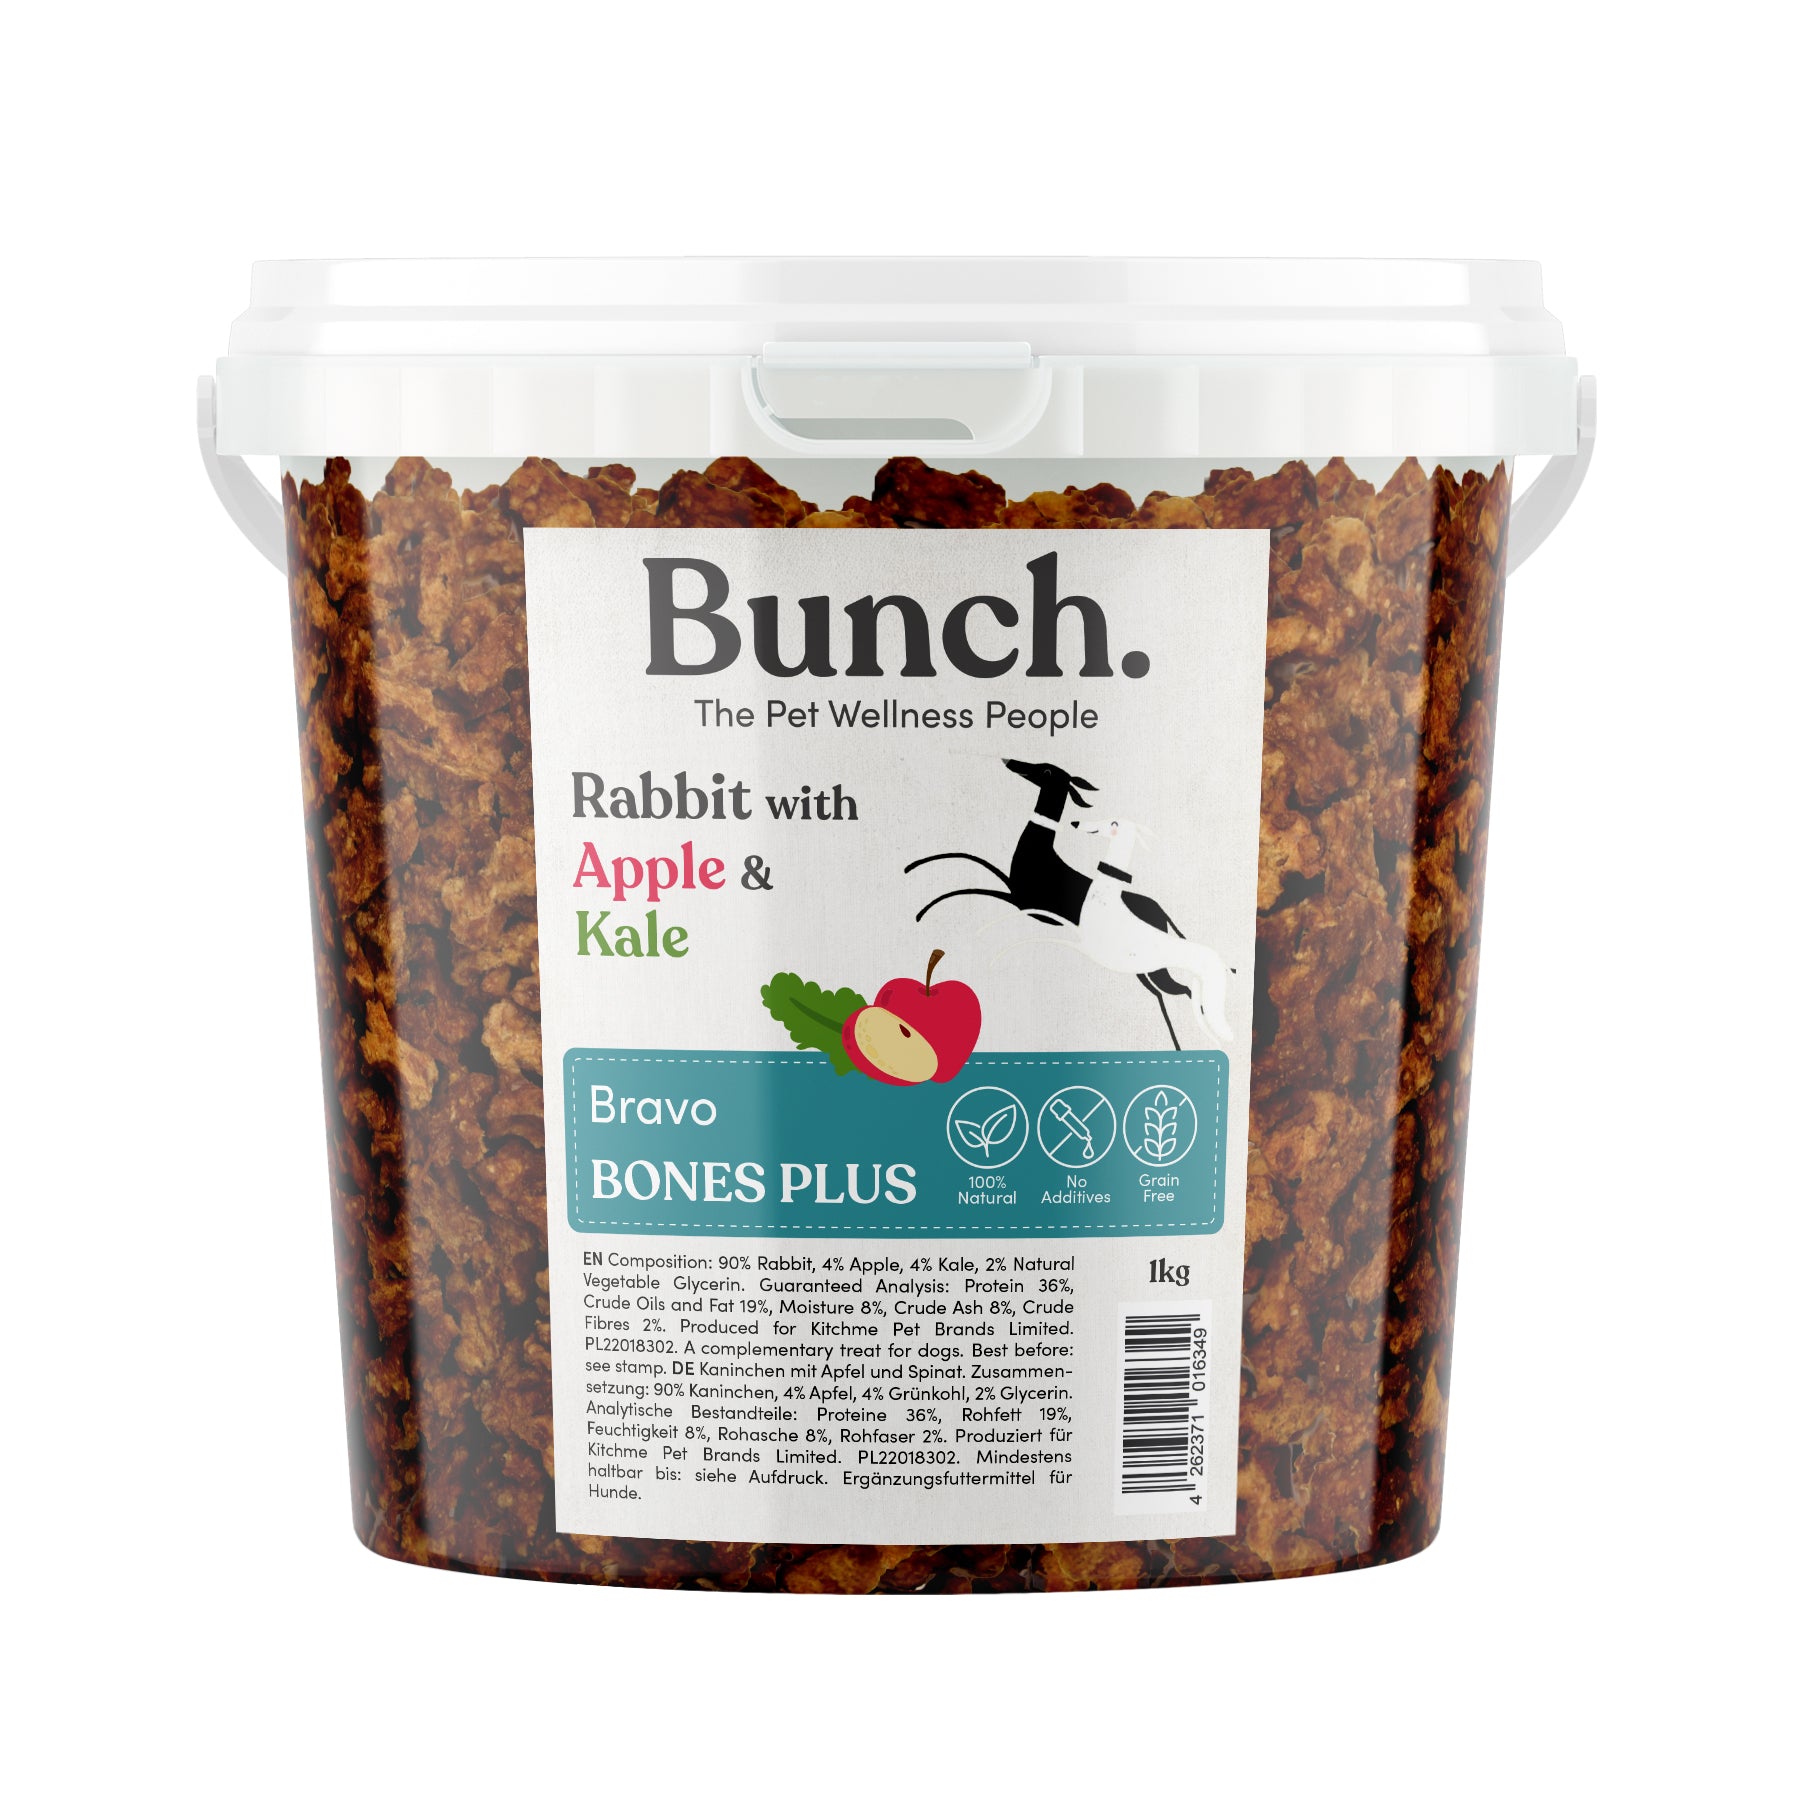 Mini Rabbit Training Bones with Apple and Kale by Bunch (1kg-Bucket)